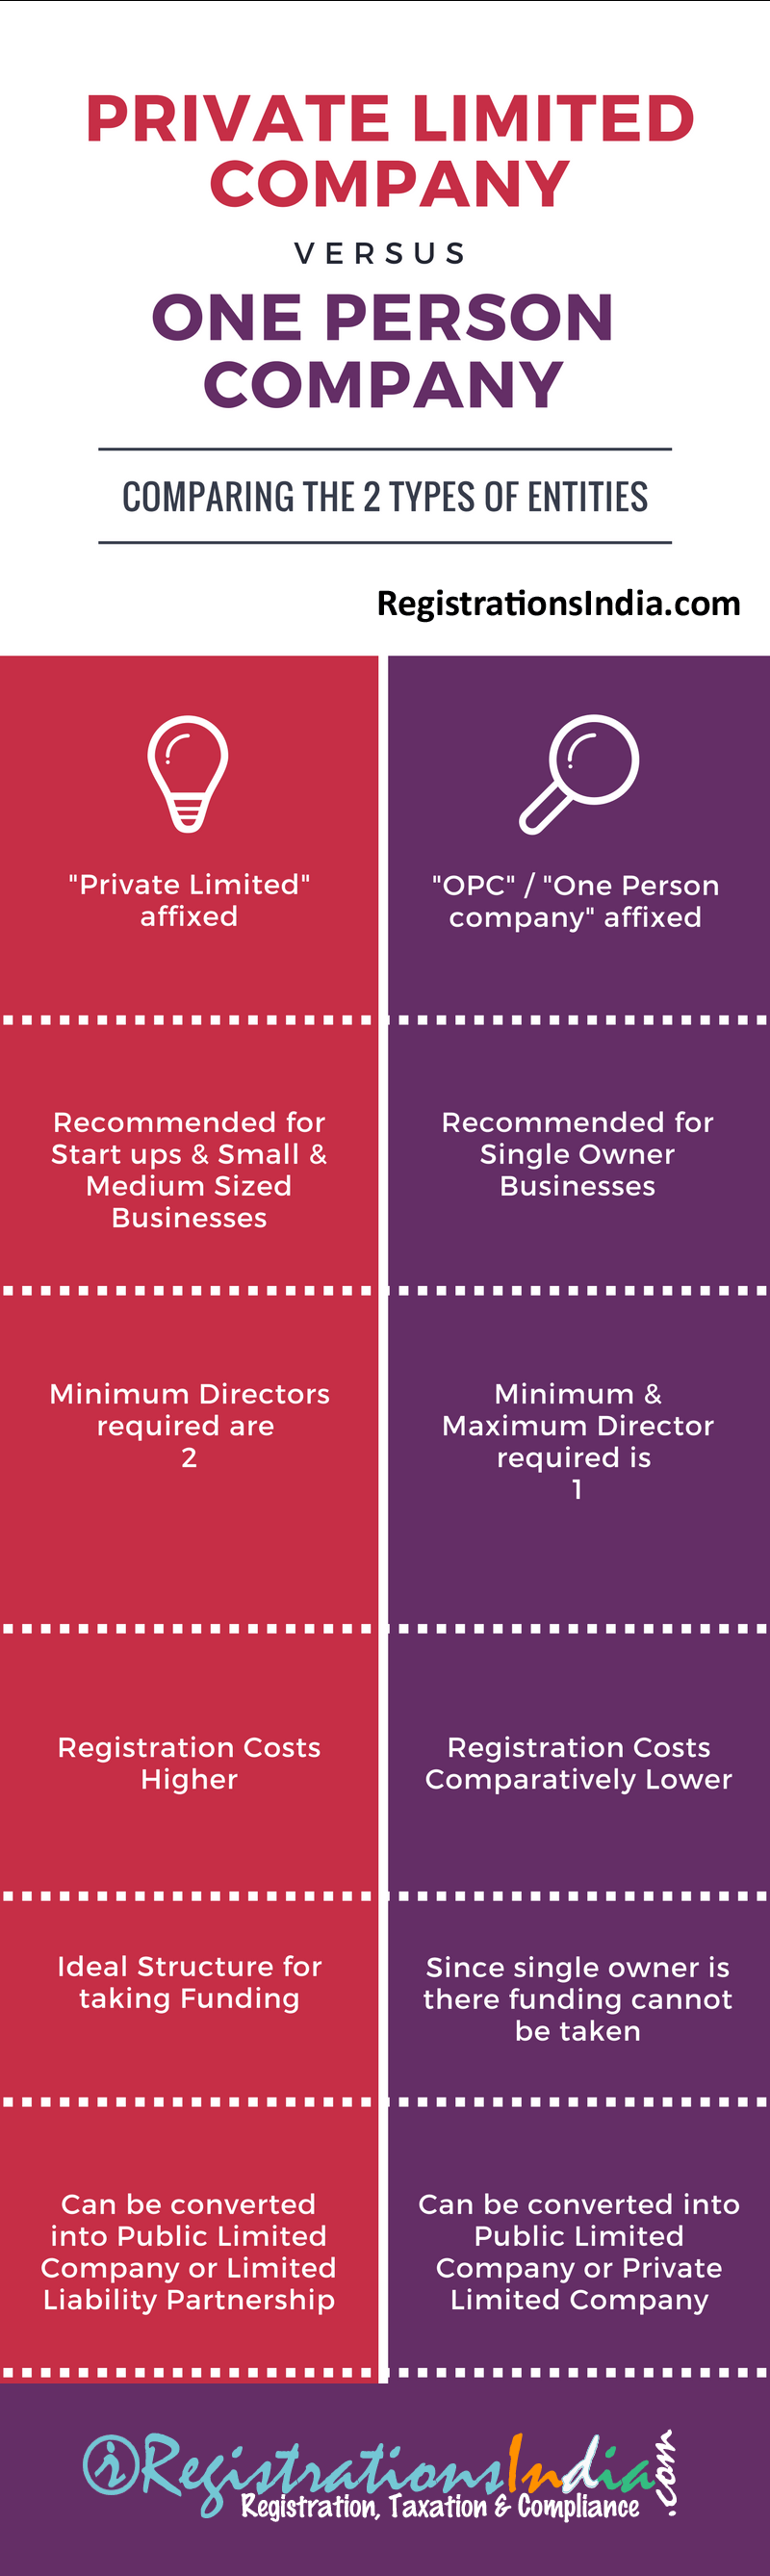 Differences Between Private Limited Company And One Person Company